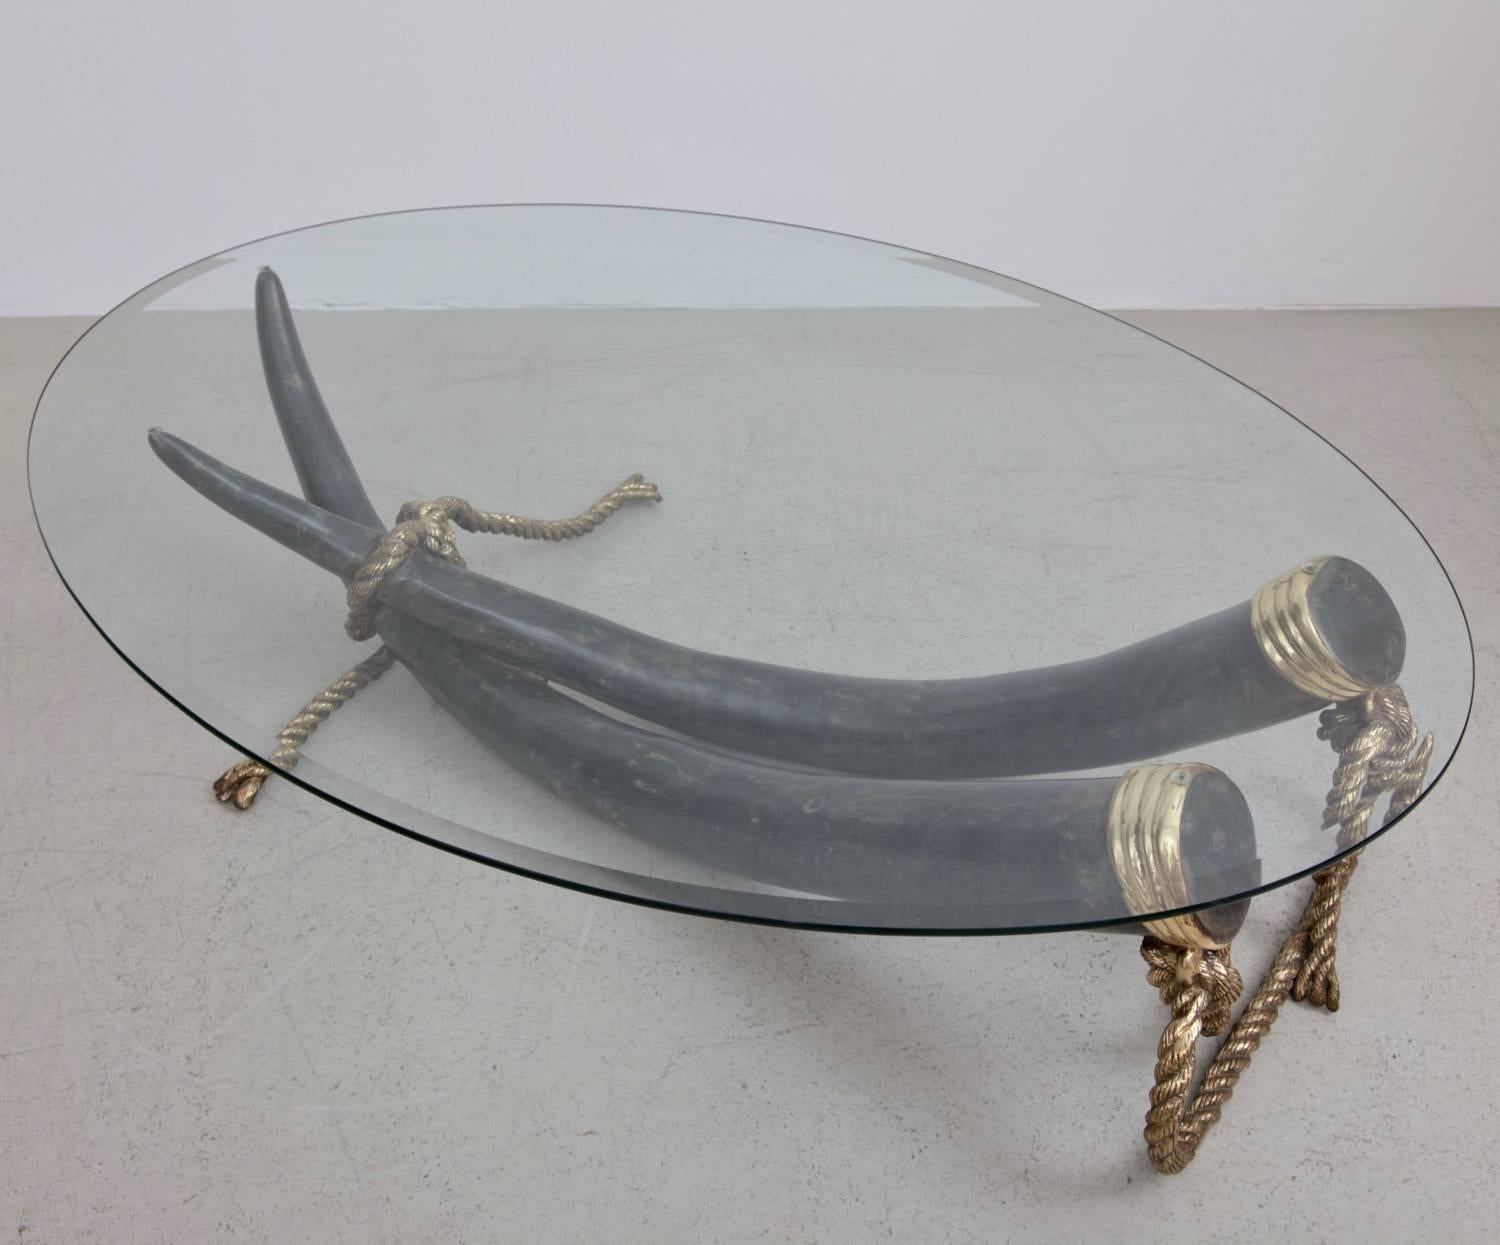 Huge elephant tusk coffee table with oval glass top. Tusks are made of bronze and brass fittings. High quality production in excellent condition. Two pieces available.

